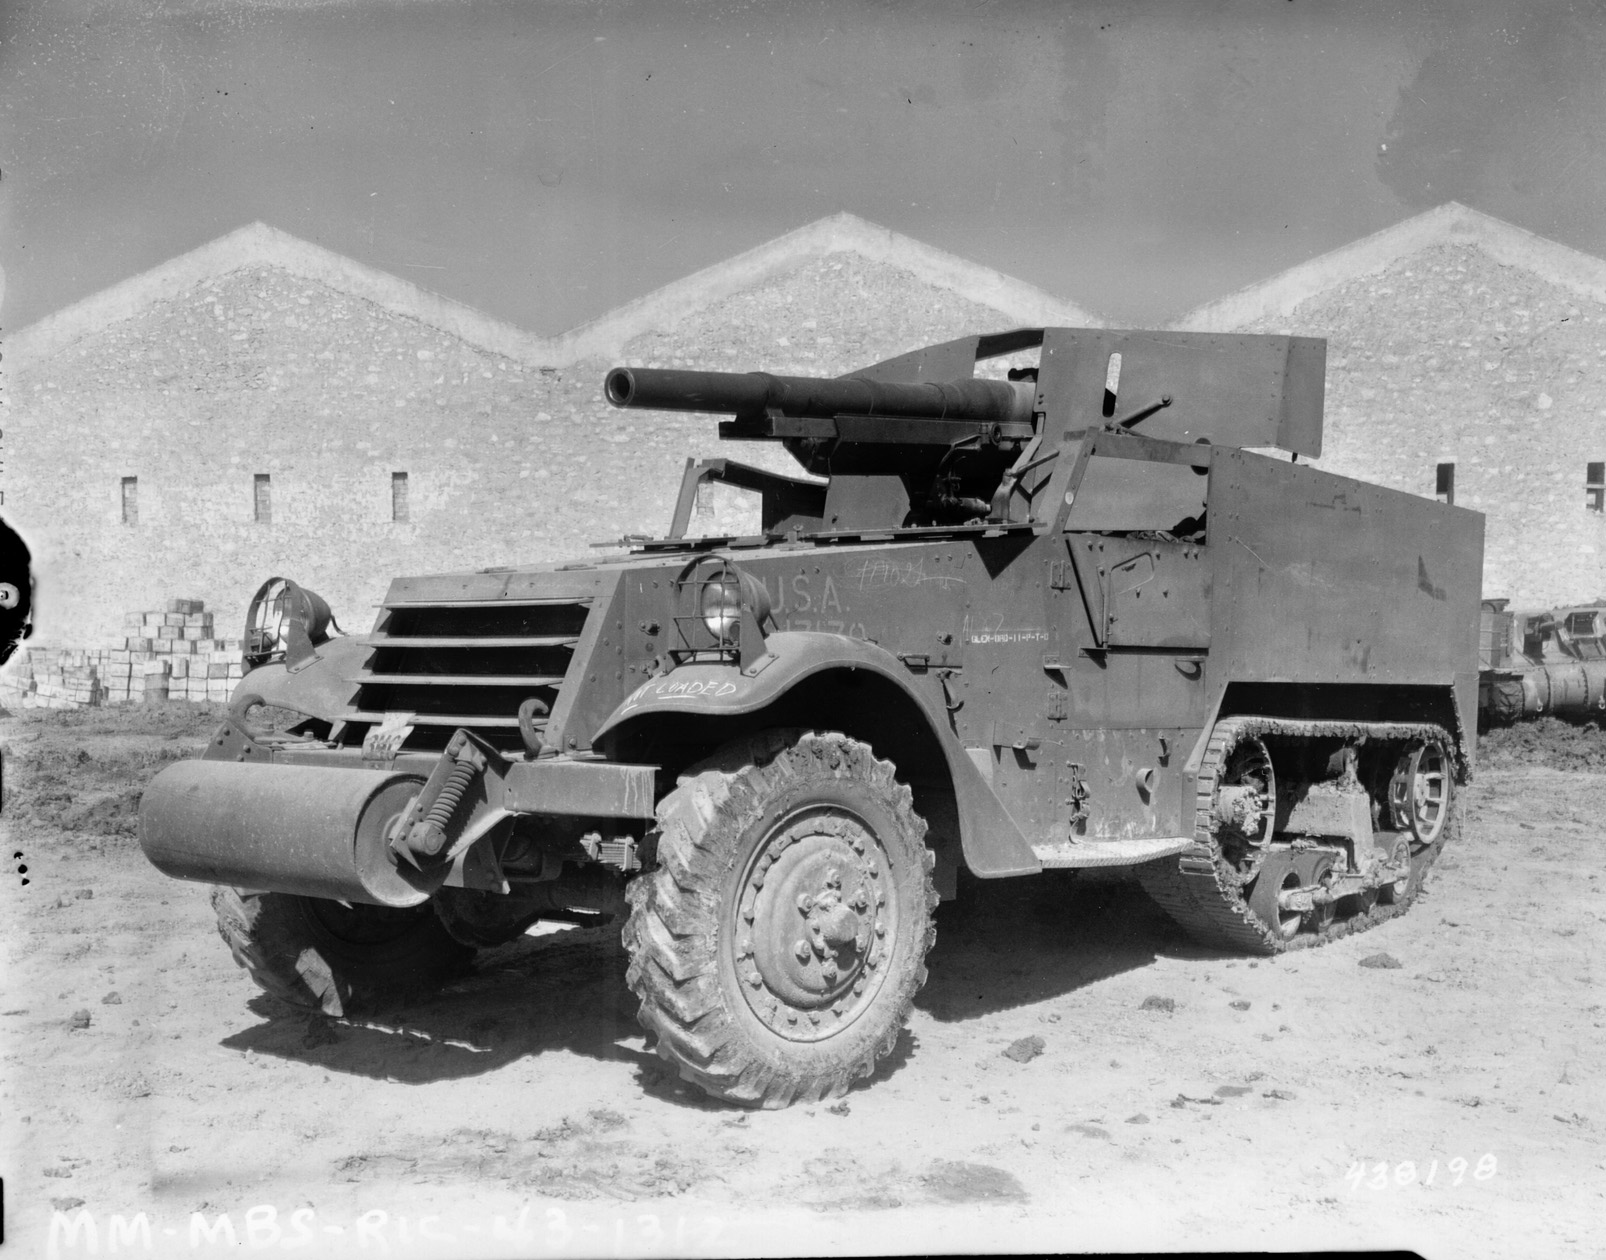 Before the M10 could be produced in numbers, the Army relied on the M3 Motor Gun Carriage, shown here in North Africa, April 1943. It was basically a French 75mm howitzer mounted on a half-track. The M3 was extremely vulnerable to enemy fire.